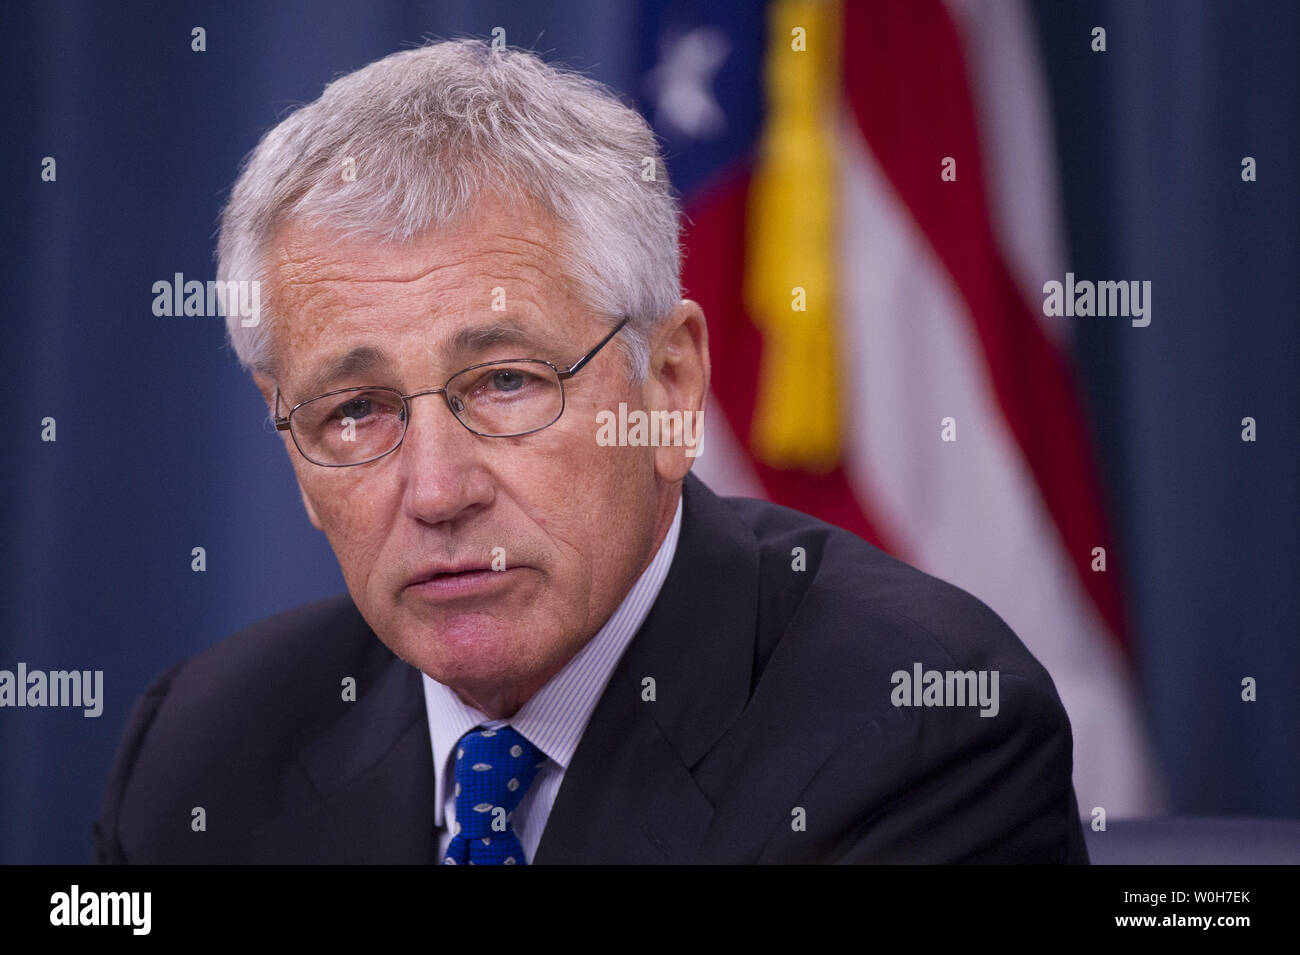 Defense Secretary Chuck Hagel speaks during a press briefing at the Pentagon in Arlington, Virginia on September 18, 2013.  Hagel is ordering reviews of security measures of U.S defense facilities worldwide and reviews of security clearance procedures. These reviews come in the wake of Monday's Navy Yard shooting that left 13 people dead including gunman Aaron Alexis, who was a Defense Department contractor with a security clearance.  UPI/Kevin Dietsch Stock Photo